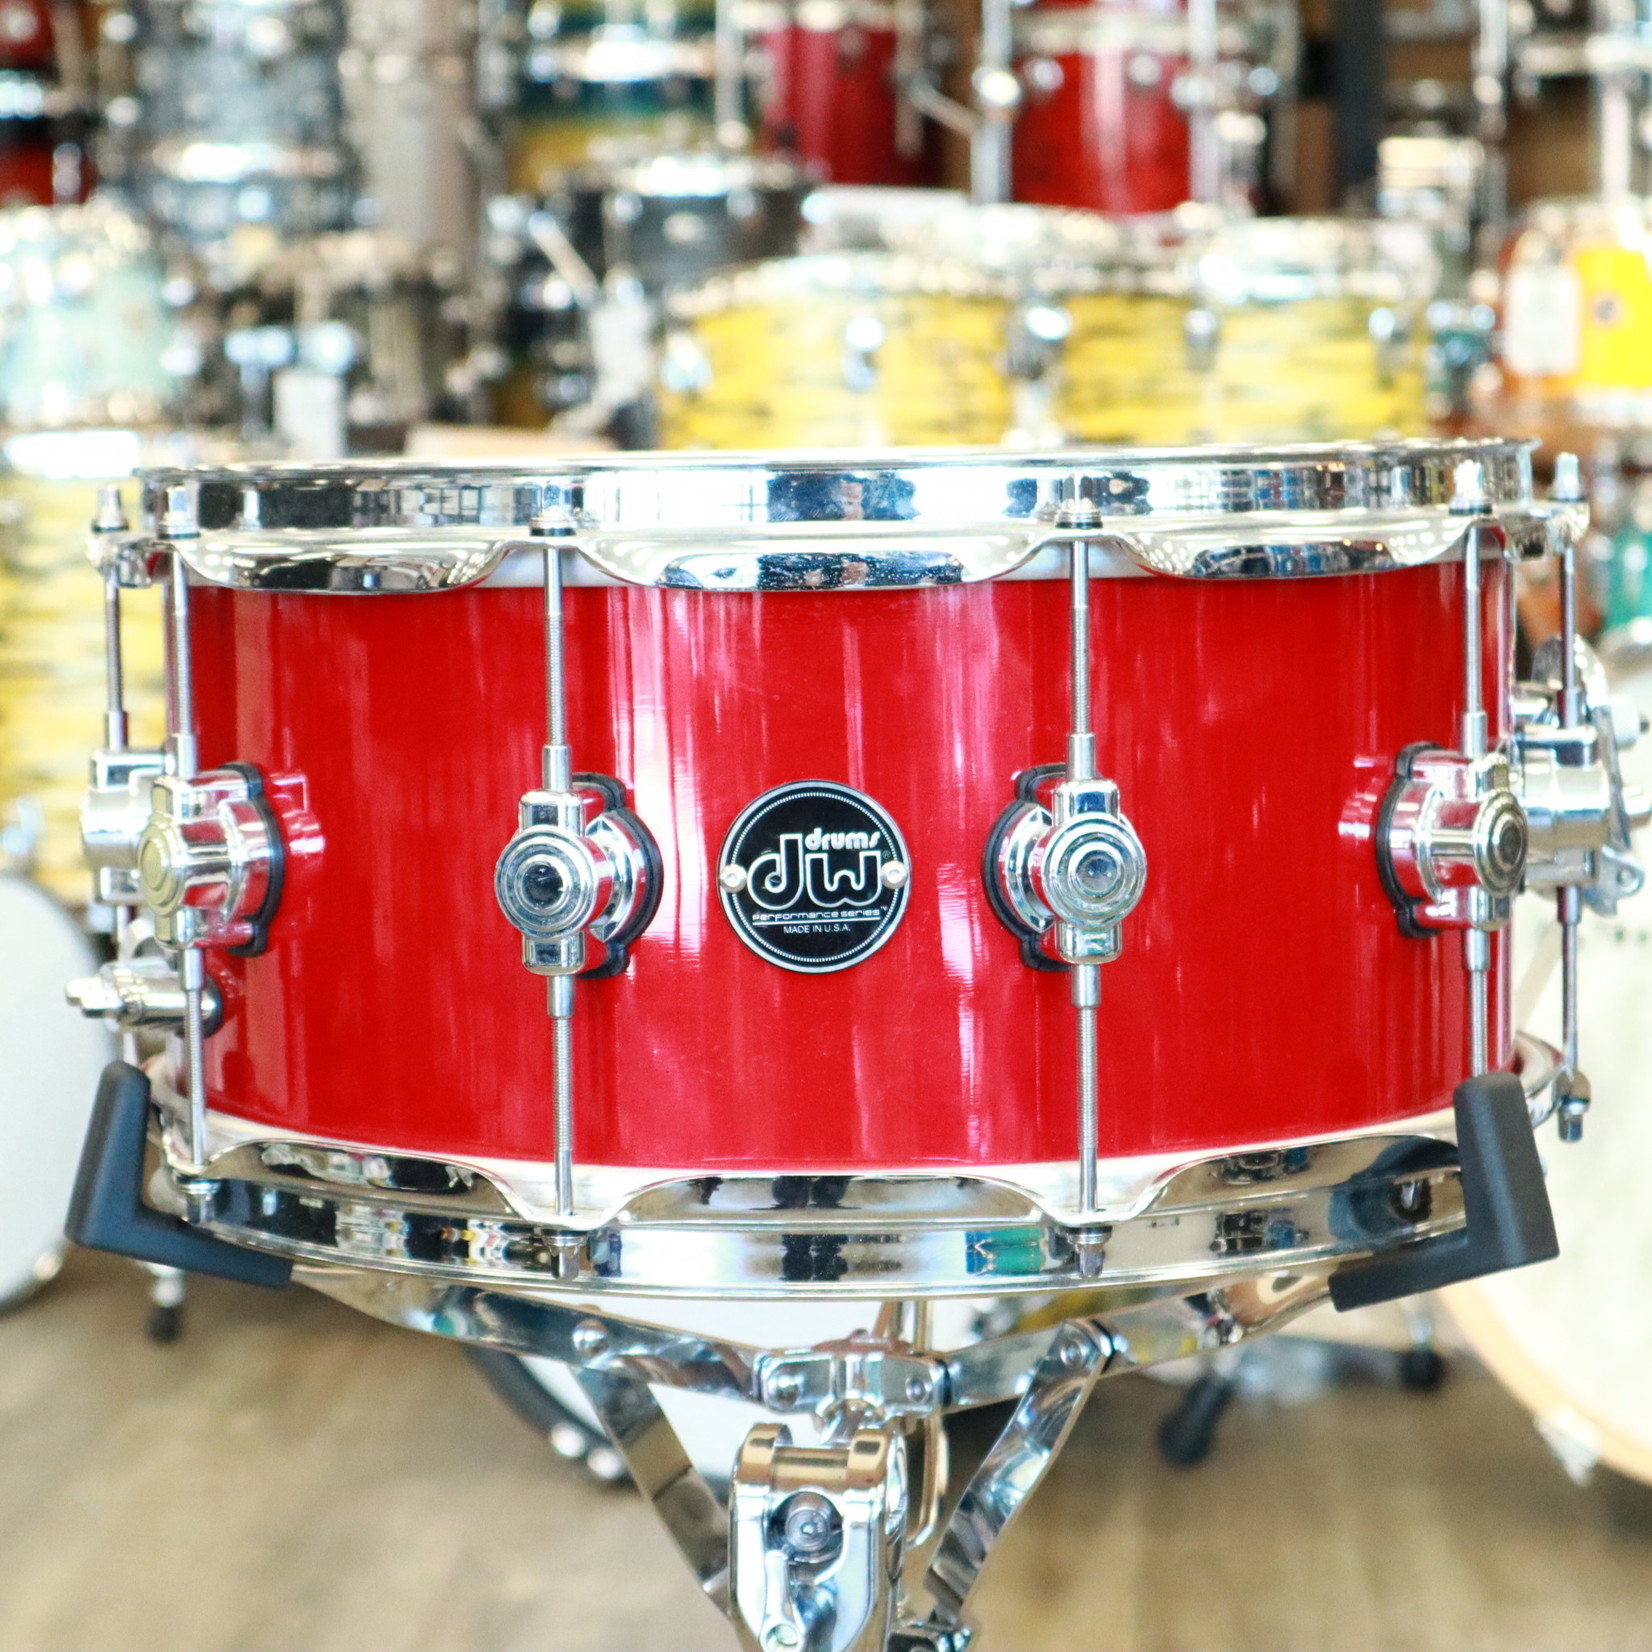 DW Like-New DW Performance Series 6.5x14" Snare Drum (Cherry Stain)